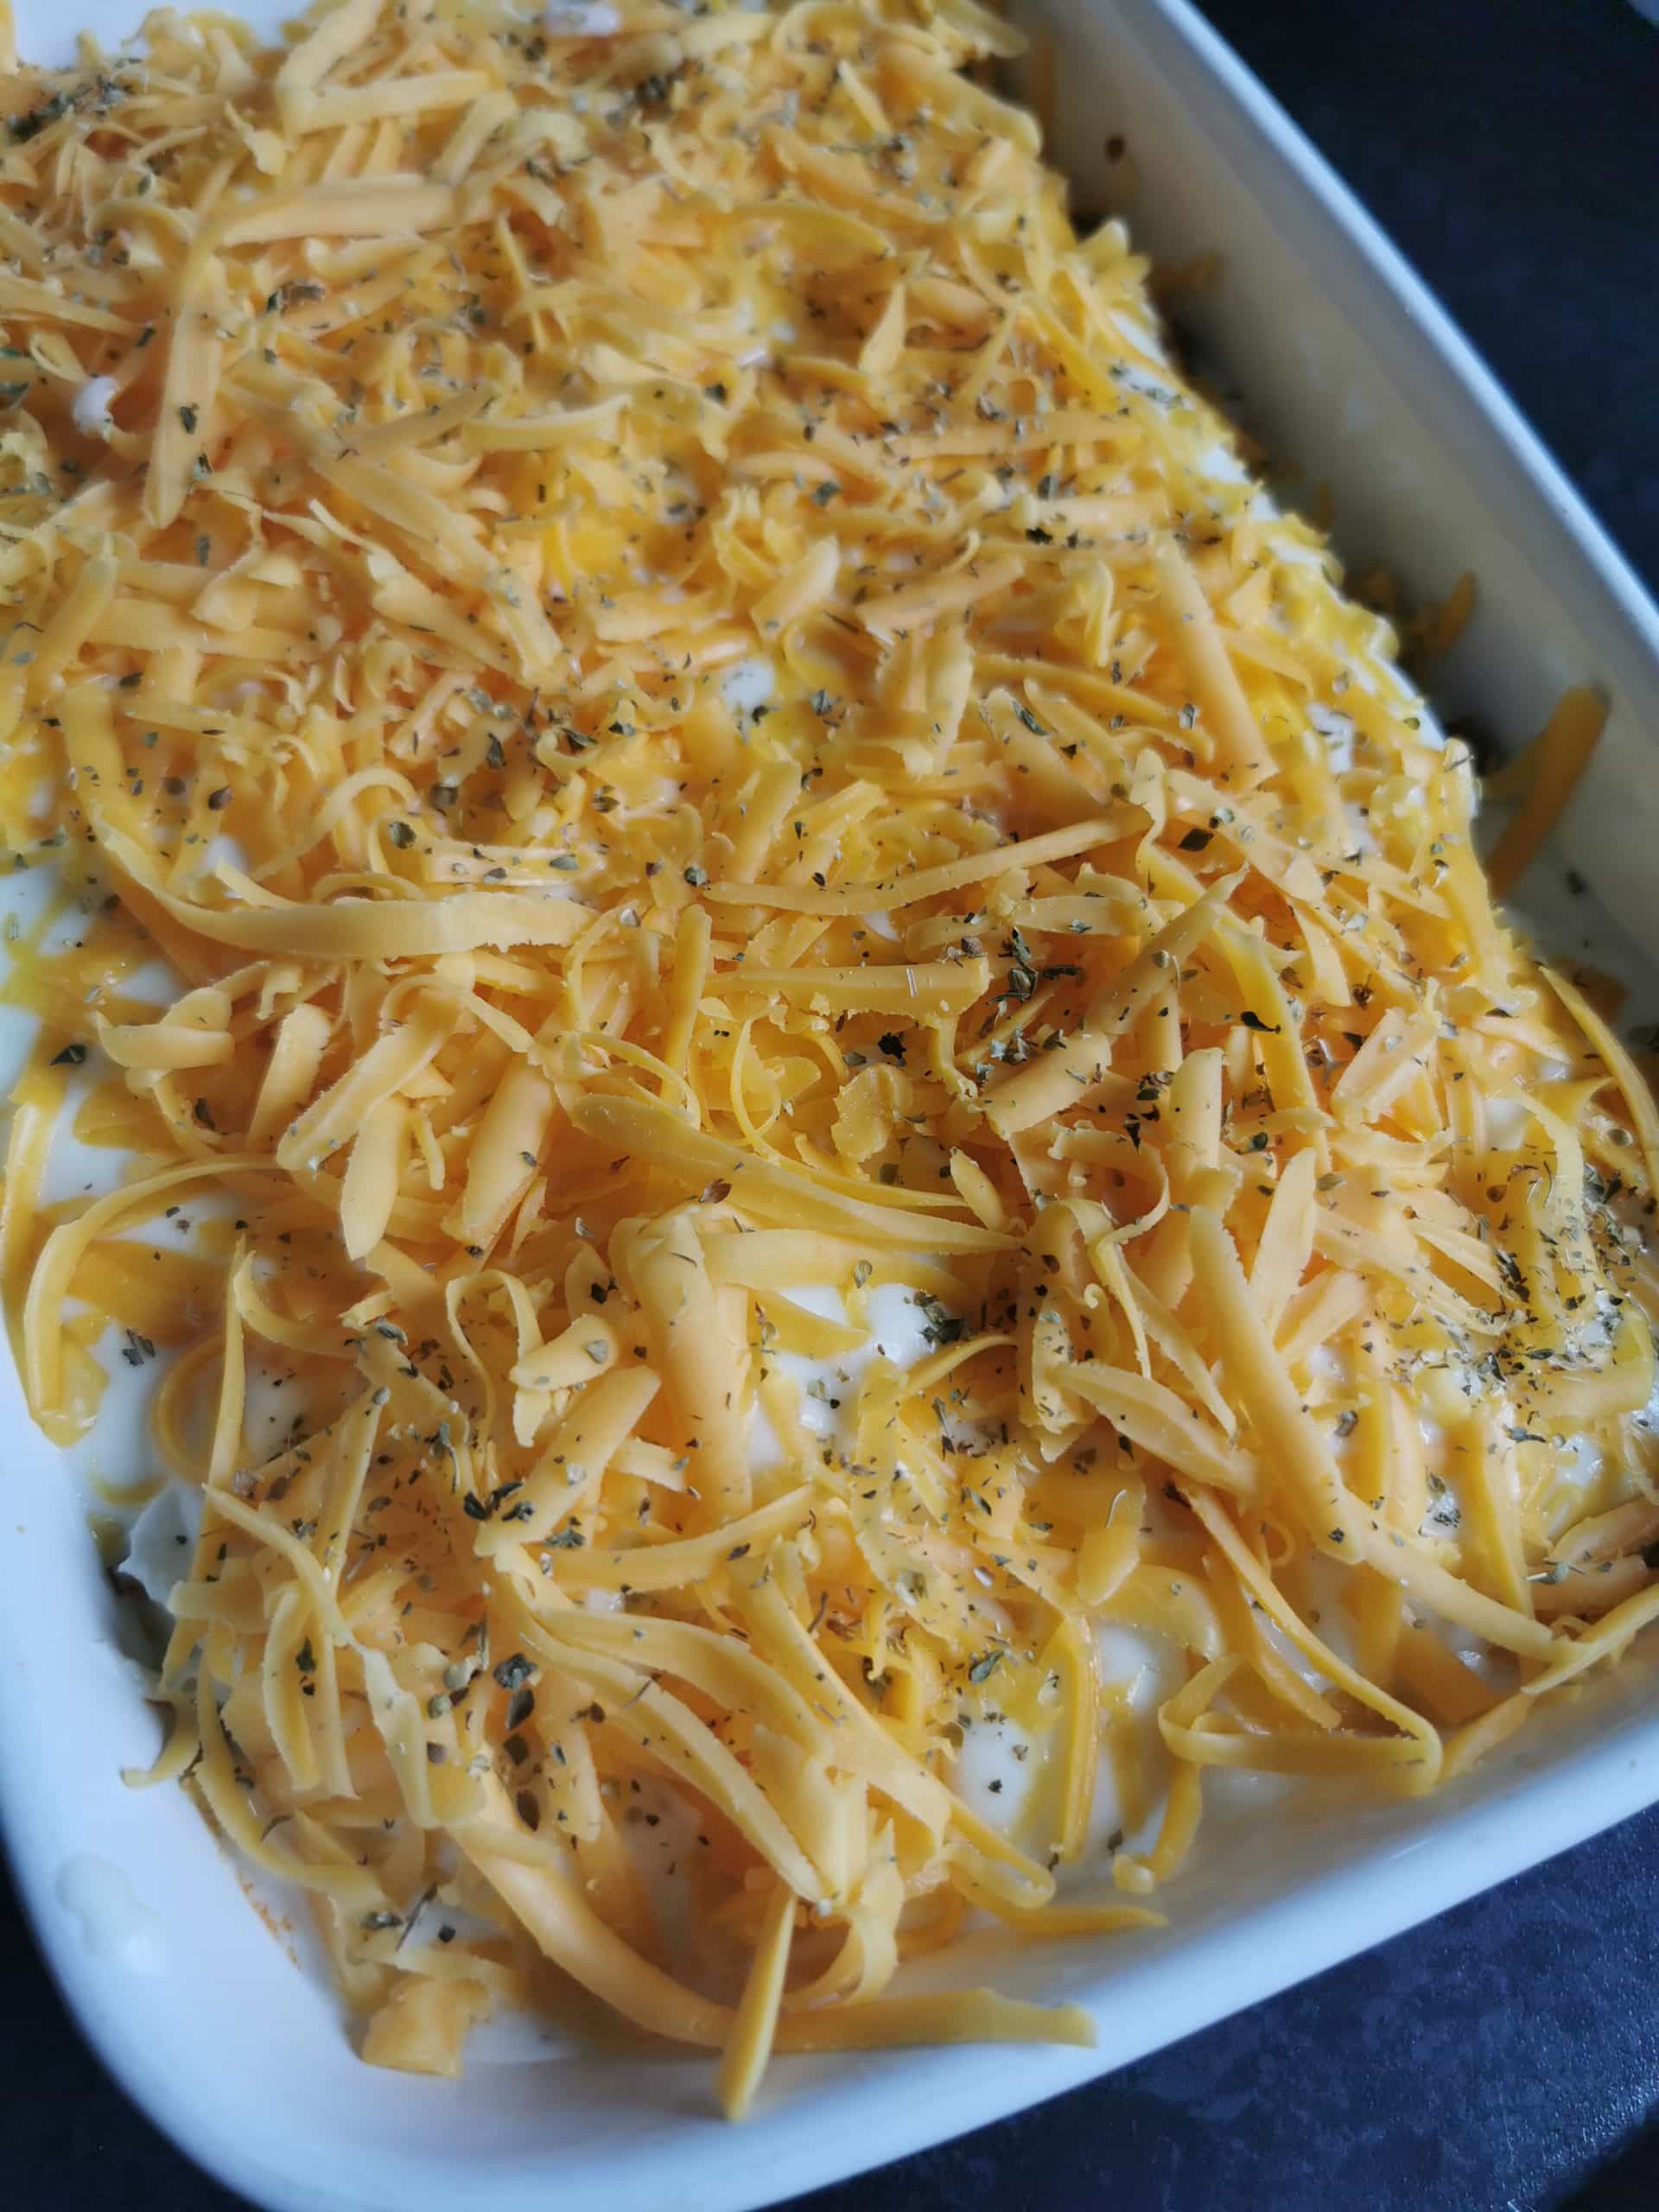 An unbaked lasagne covered with grated cheese